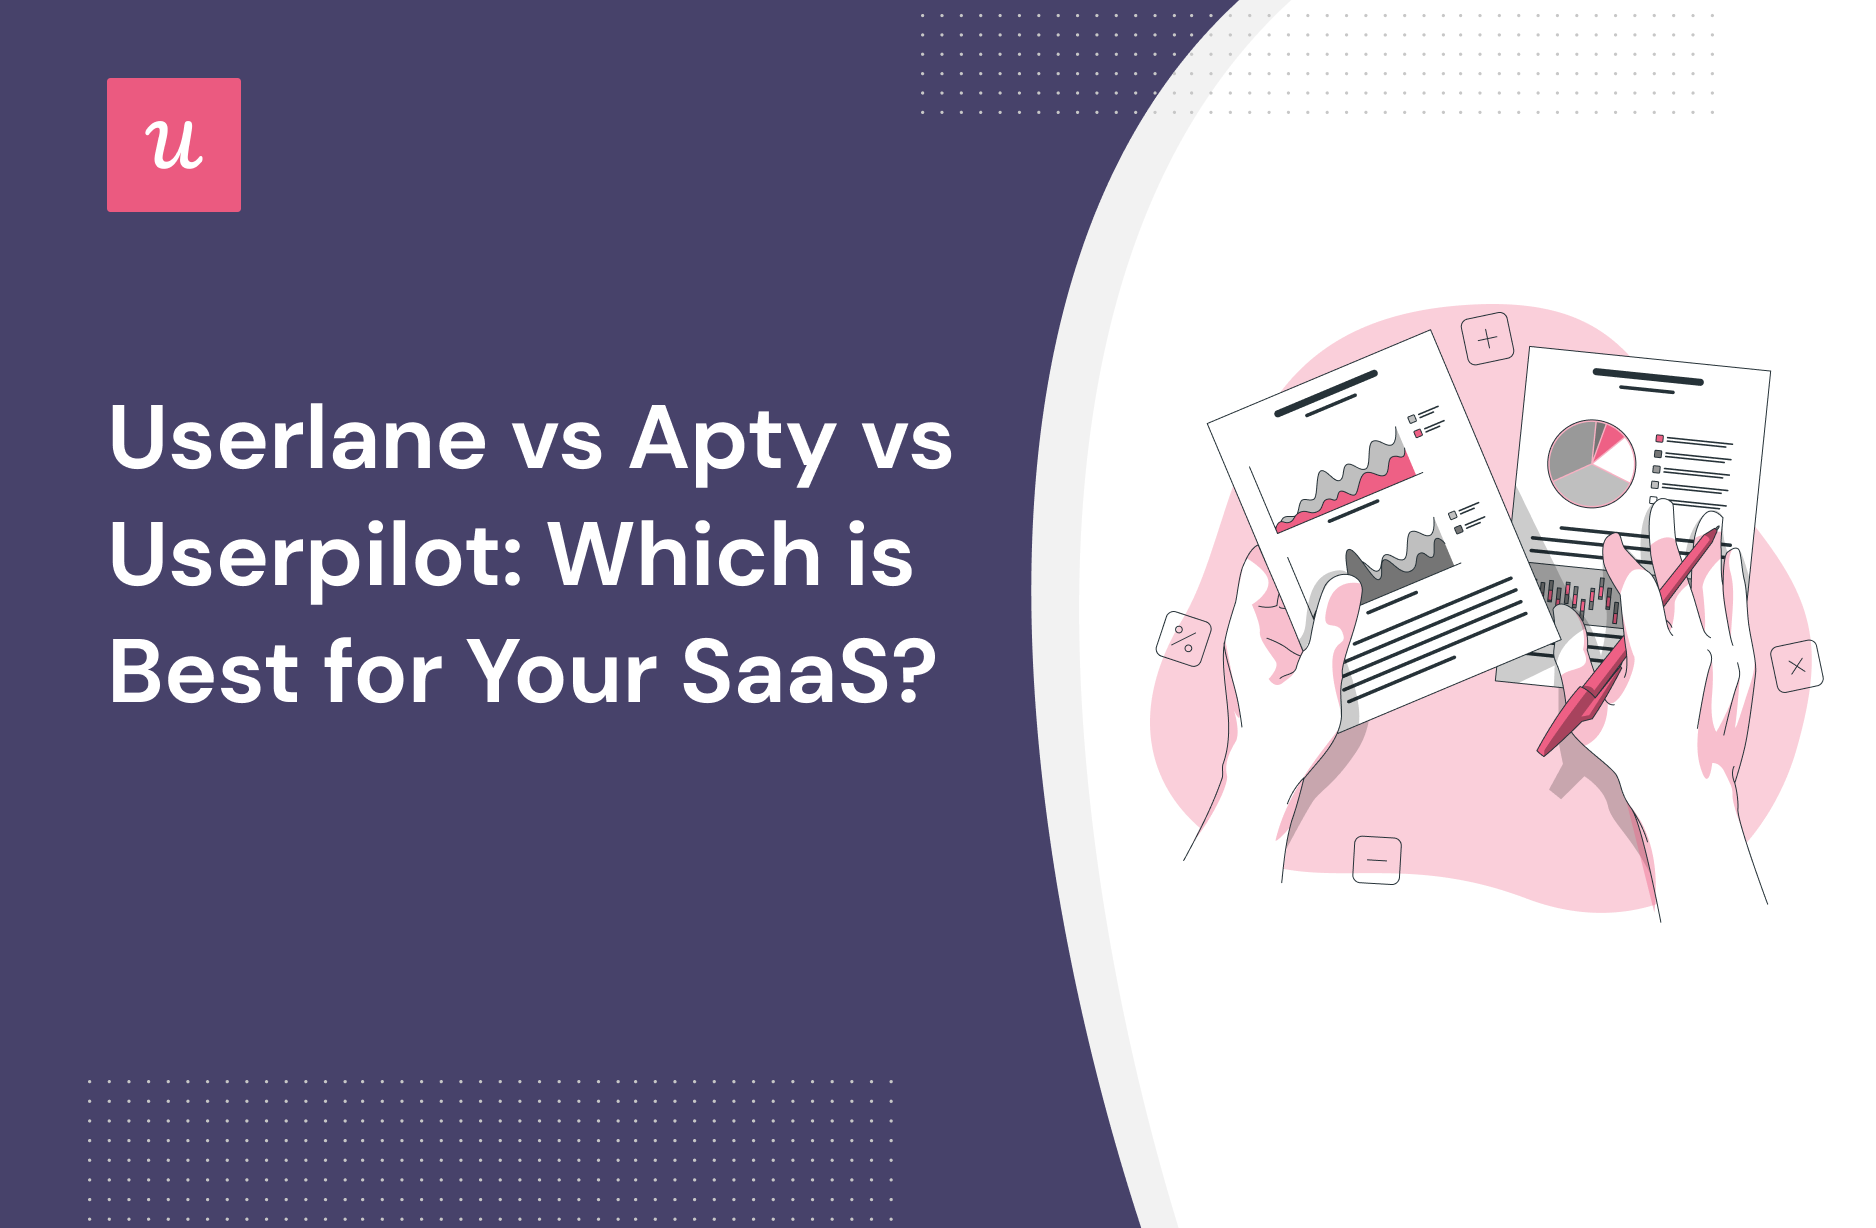 Userlane vs Apty vs Userpilot: Which is Best for Your SaaS?